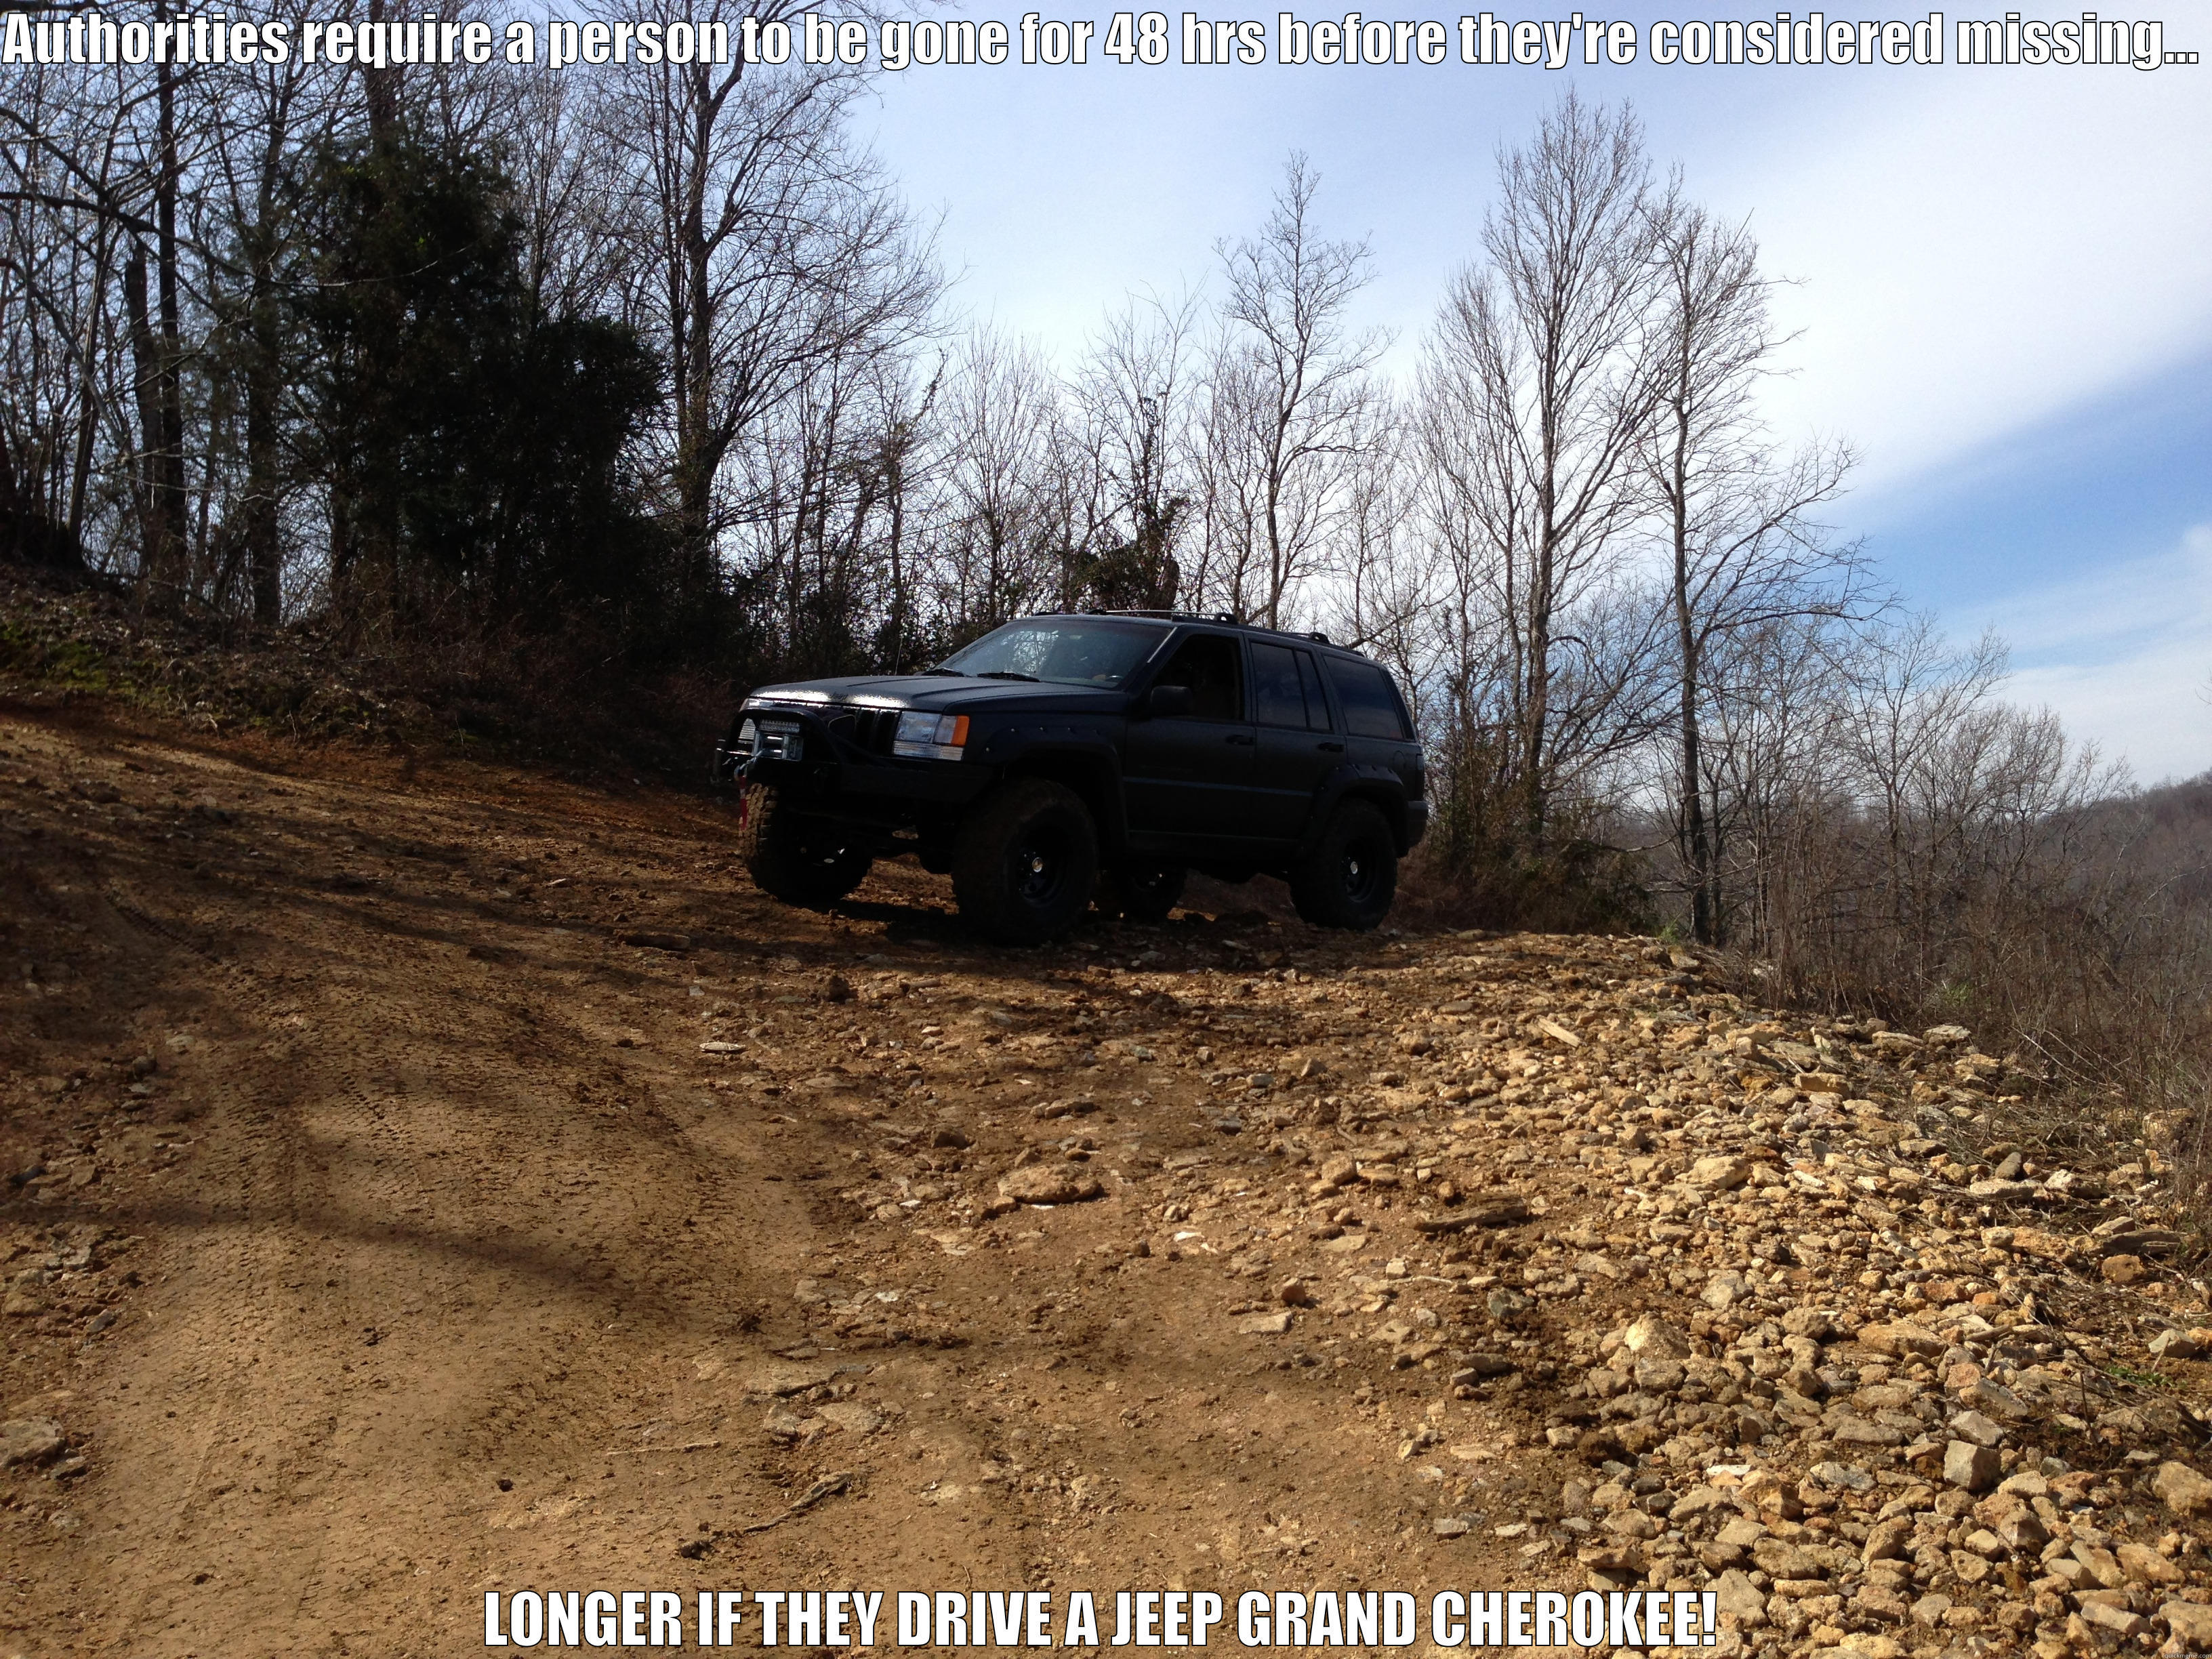 Jeep ZJ - AUTHORITIES REQUIRE A PERSON TO BE GONE FOR 48 HRS BEFORE THEY'RE CONSIDERED MISSING...  LONGER IF THEY DRIVE A JEEP GRAND CHEROKEE! Misc